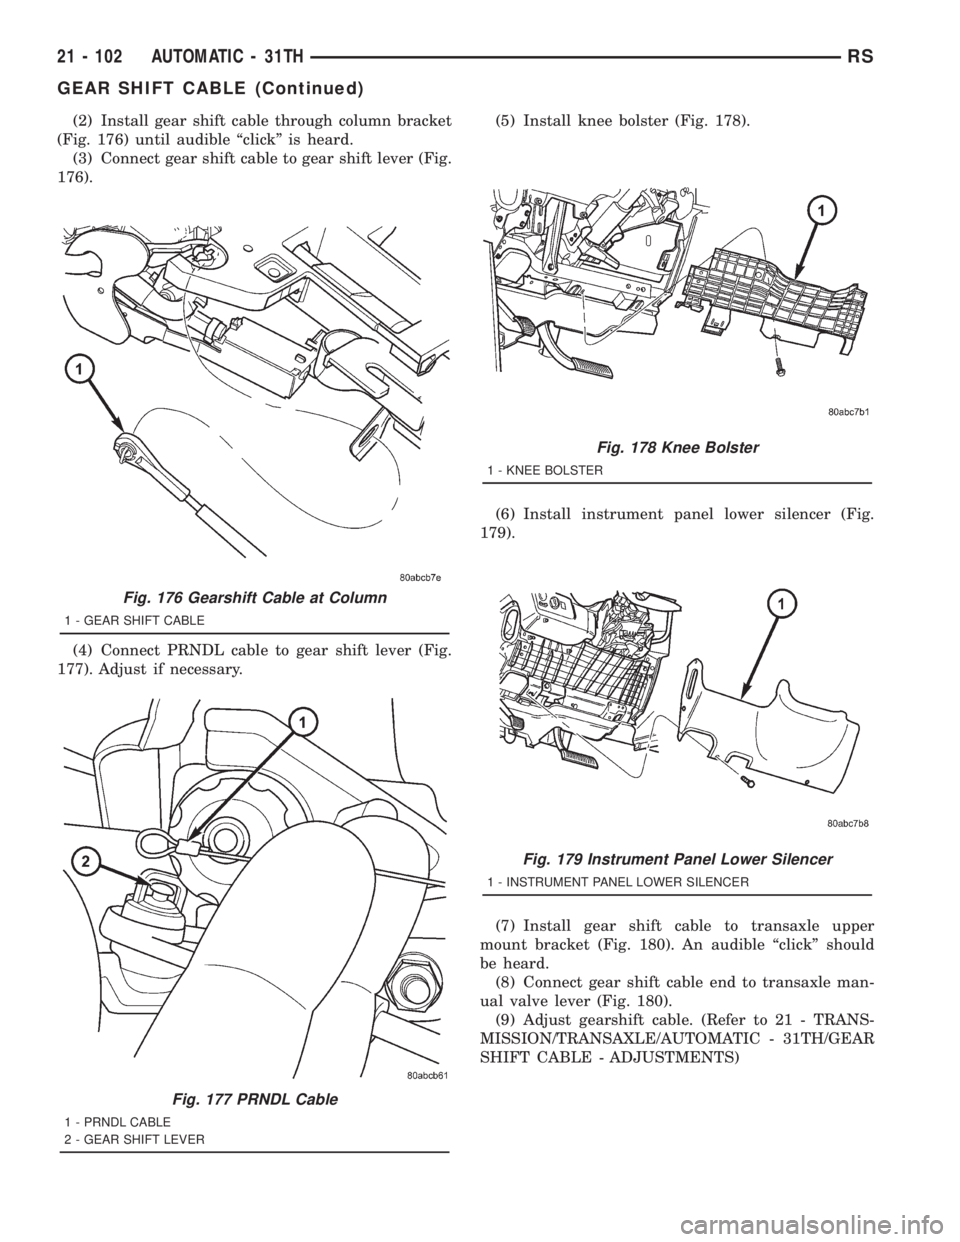 CHRYSLER VOYAGER 2001  Service Manual (2) Install gear shift cable through column bracket
(Fig. 176) until audible ªclickº is heard.
(3) Connect gear shift cable to gear shift lever (Fig.
176).
(4) Connect PRNDL cable to gear shift leve